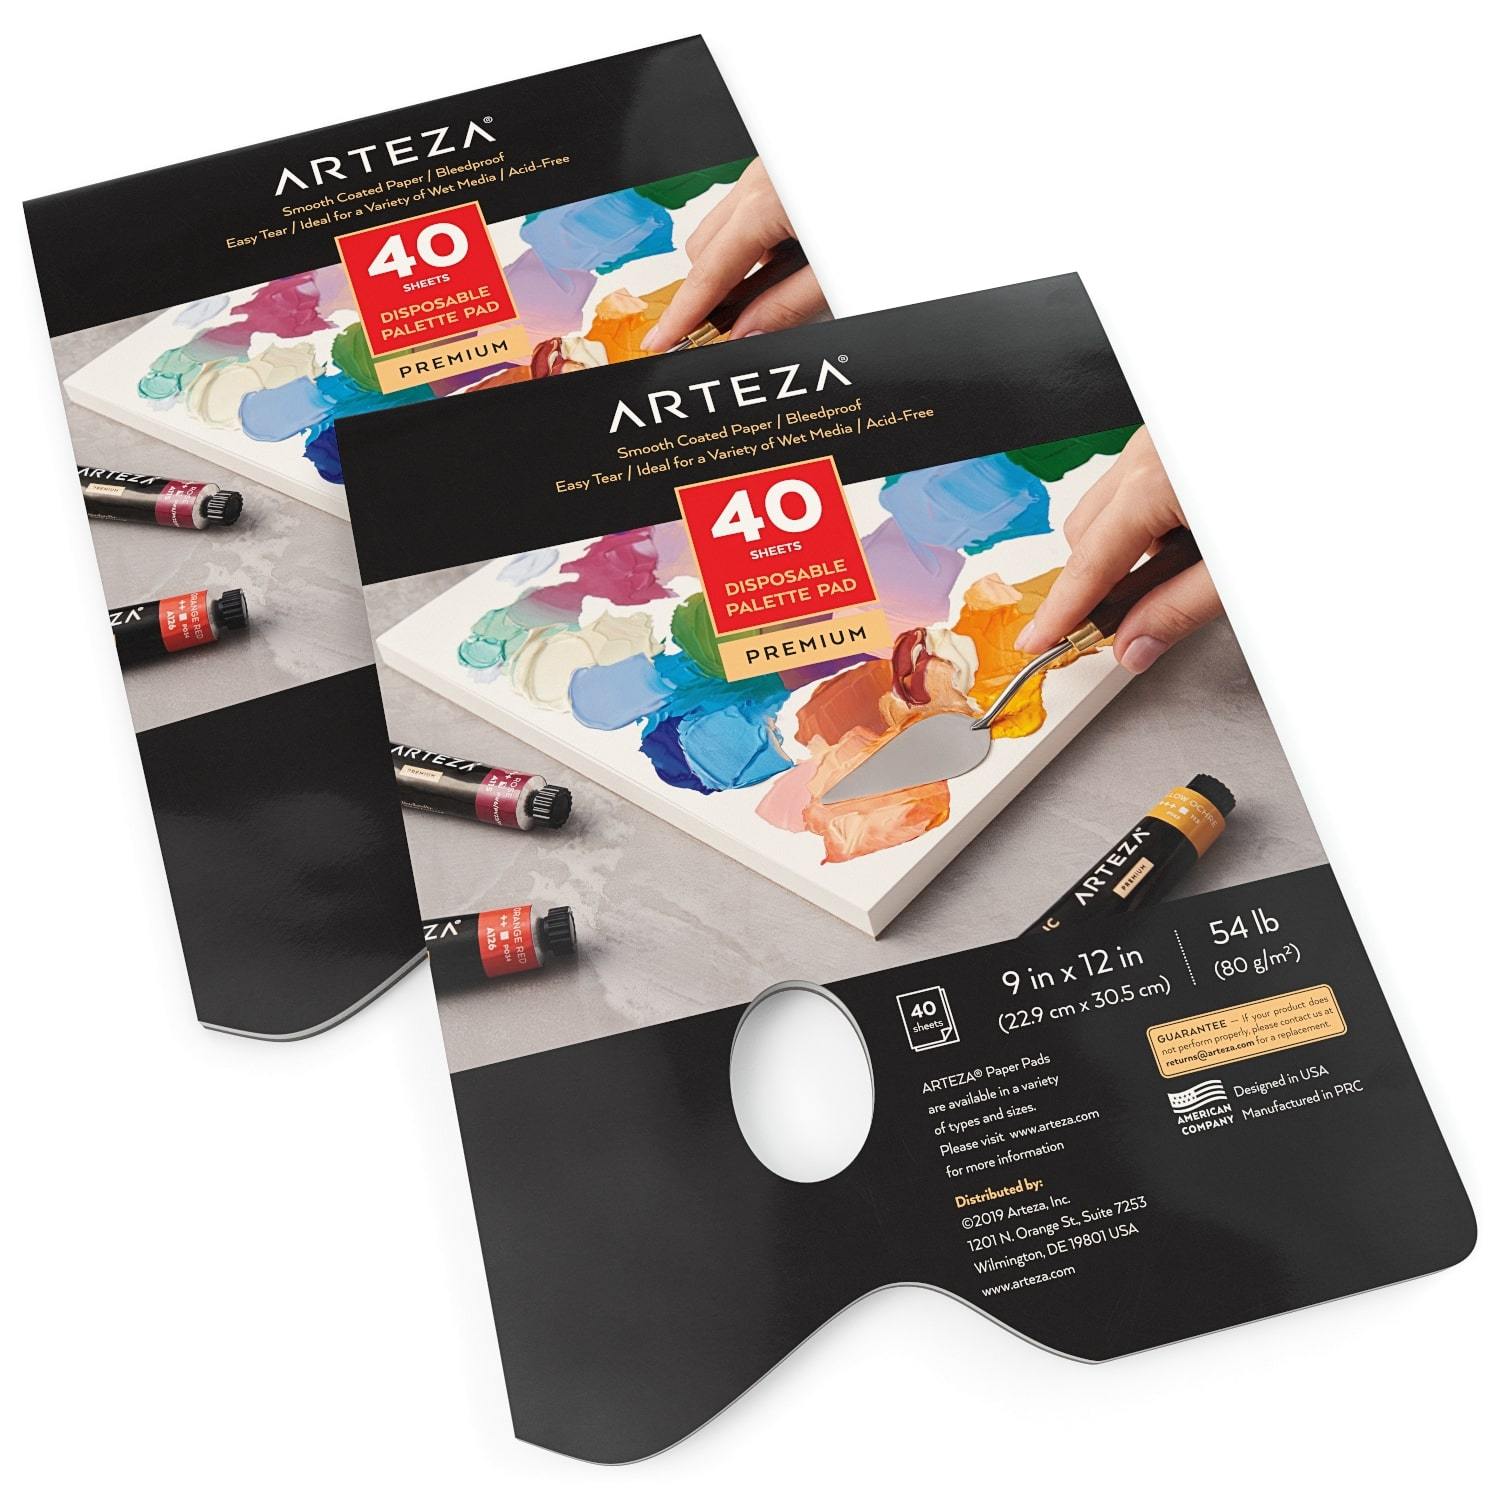 9 x 12 Mixed Media 40 Sheet Palette Paper Pad - Mixed Media Pads - Art Supplies & Painting